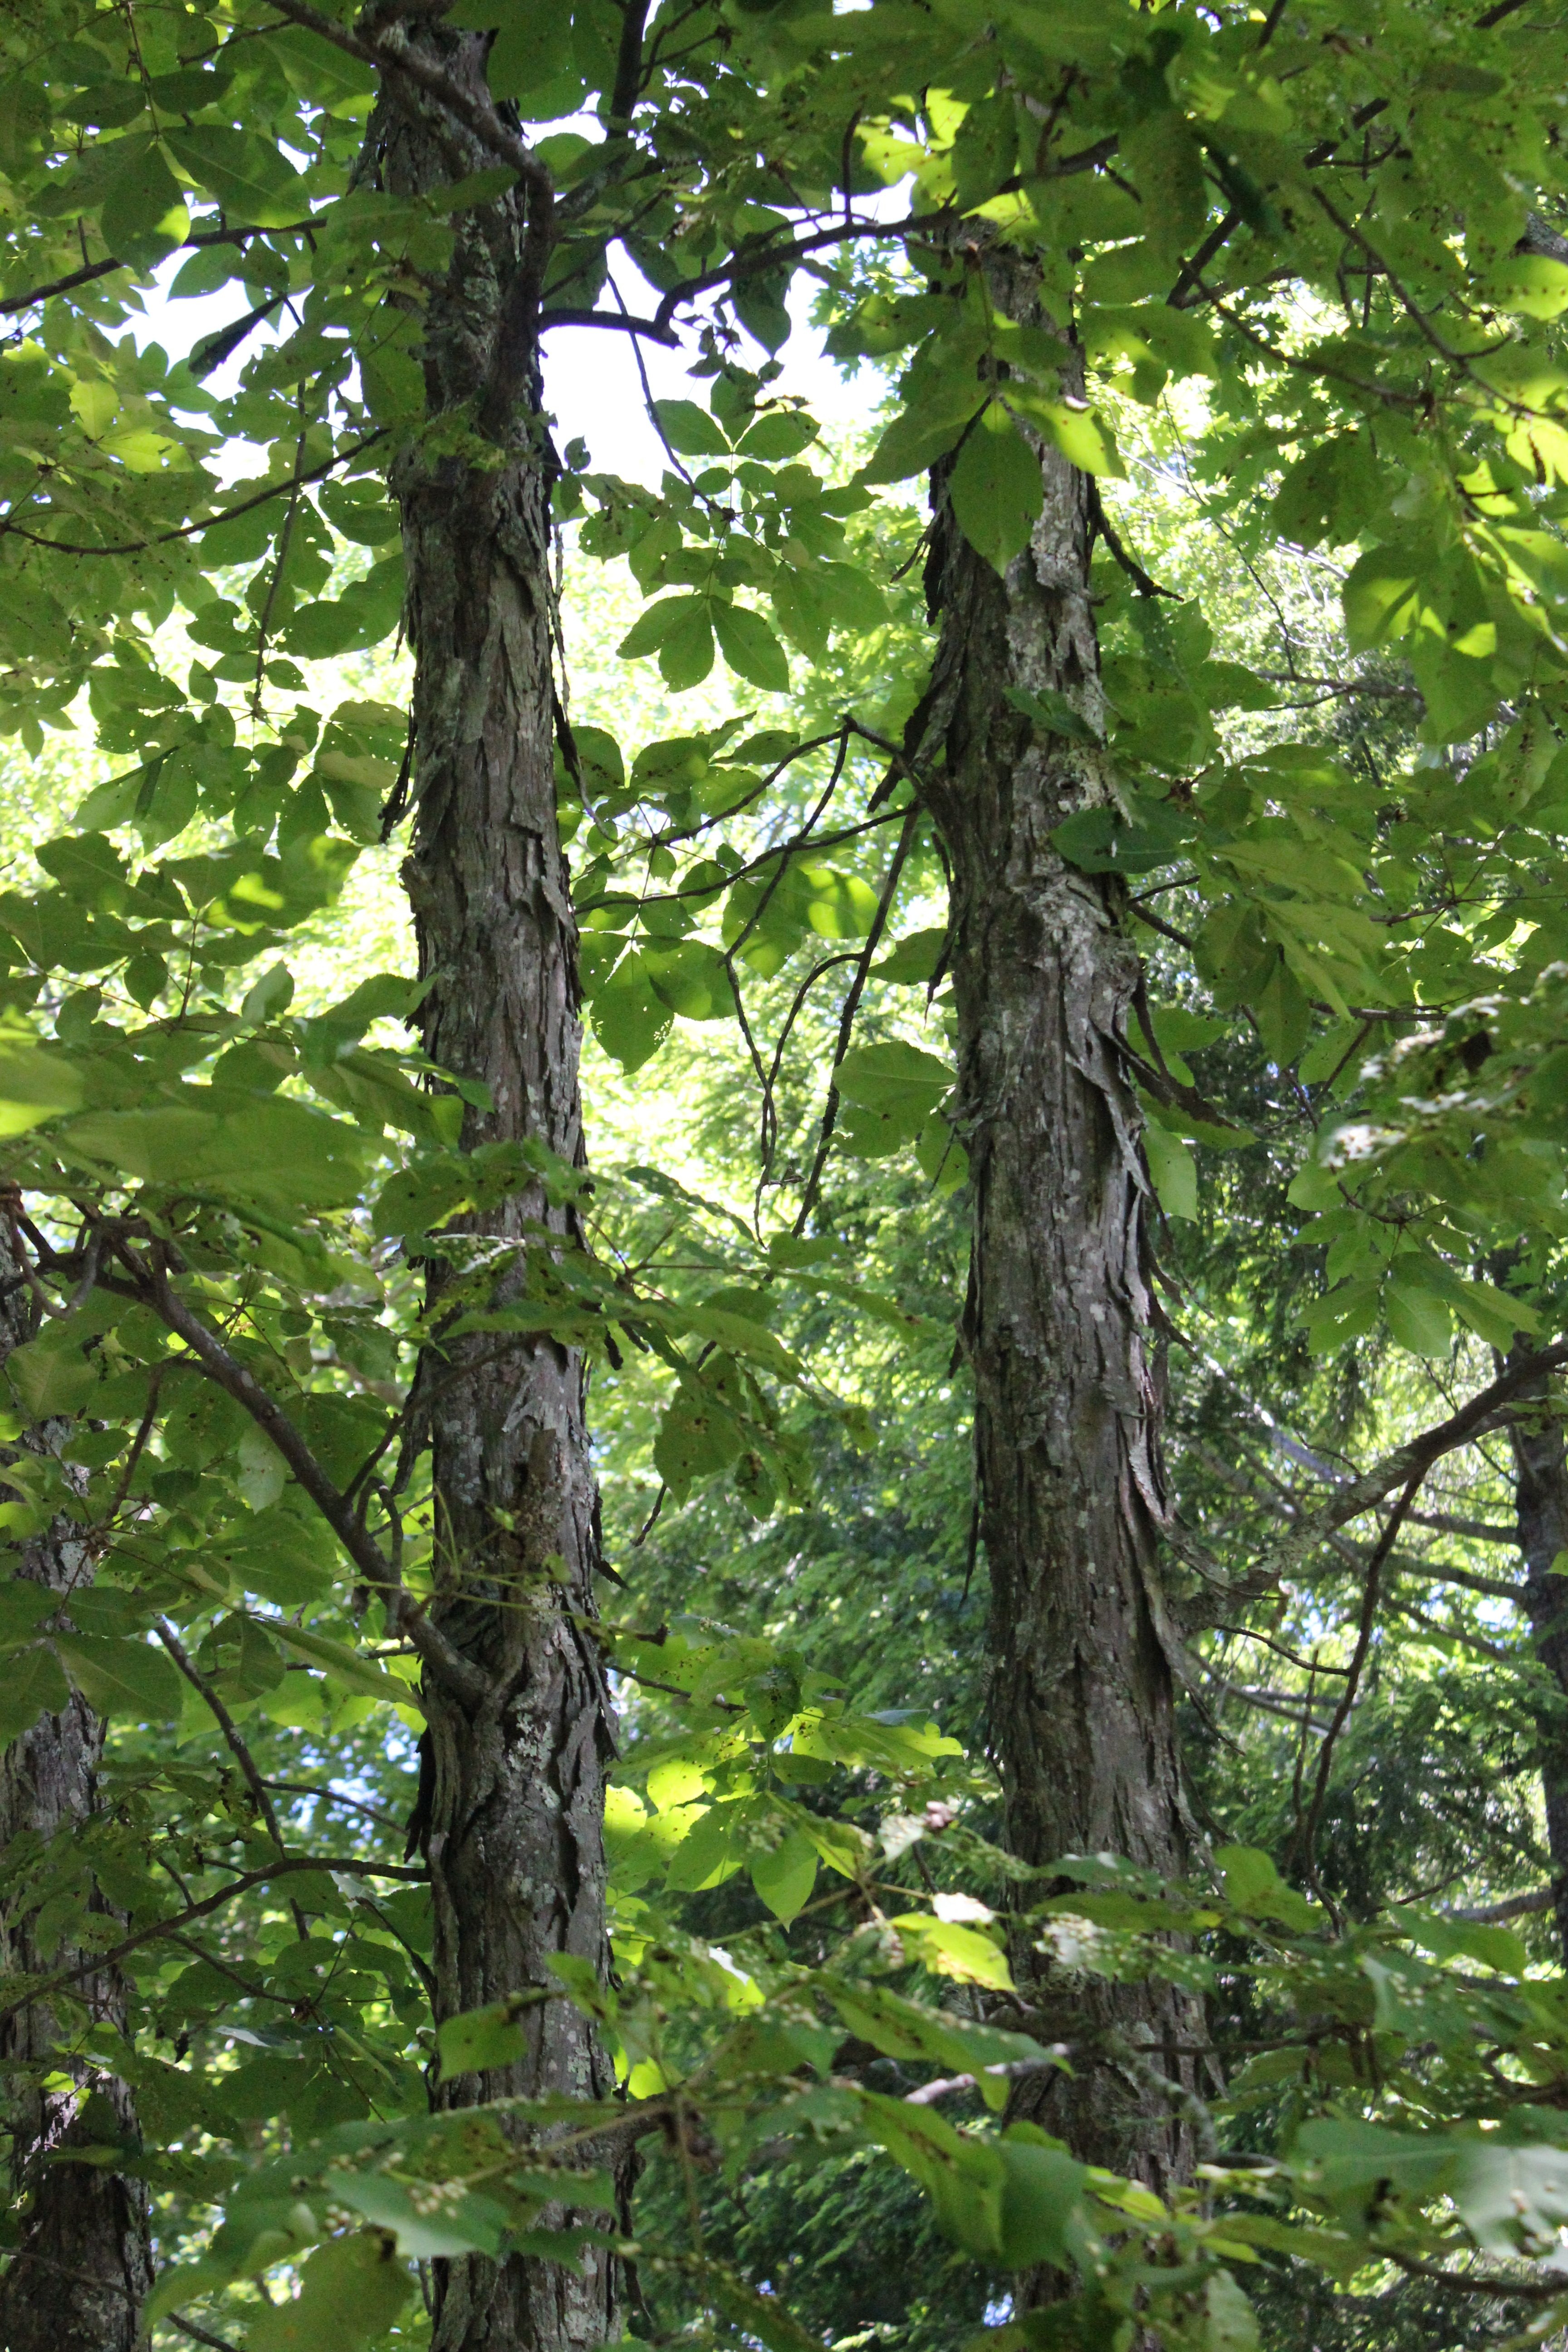 What is shellbark hickory?